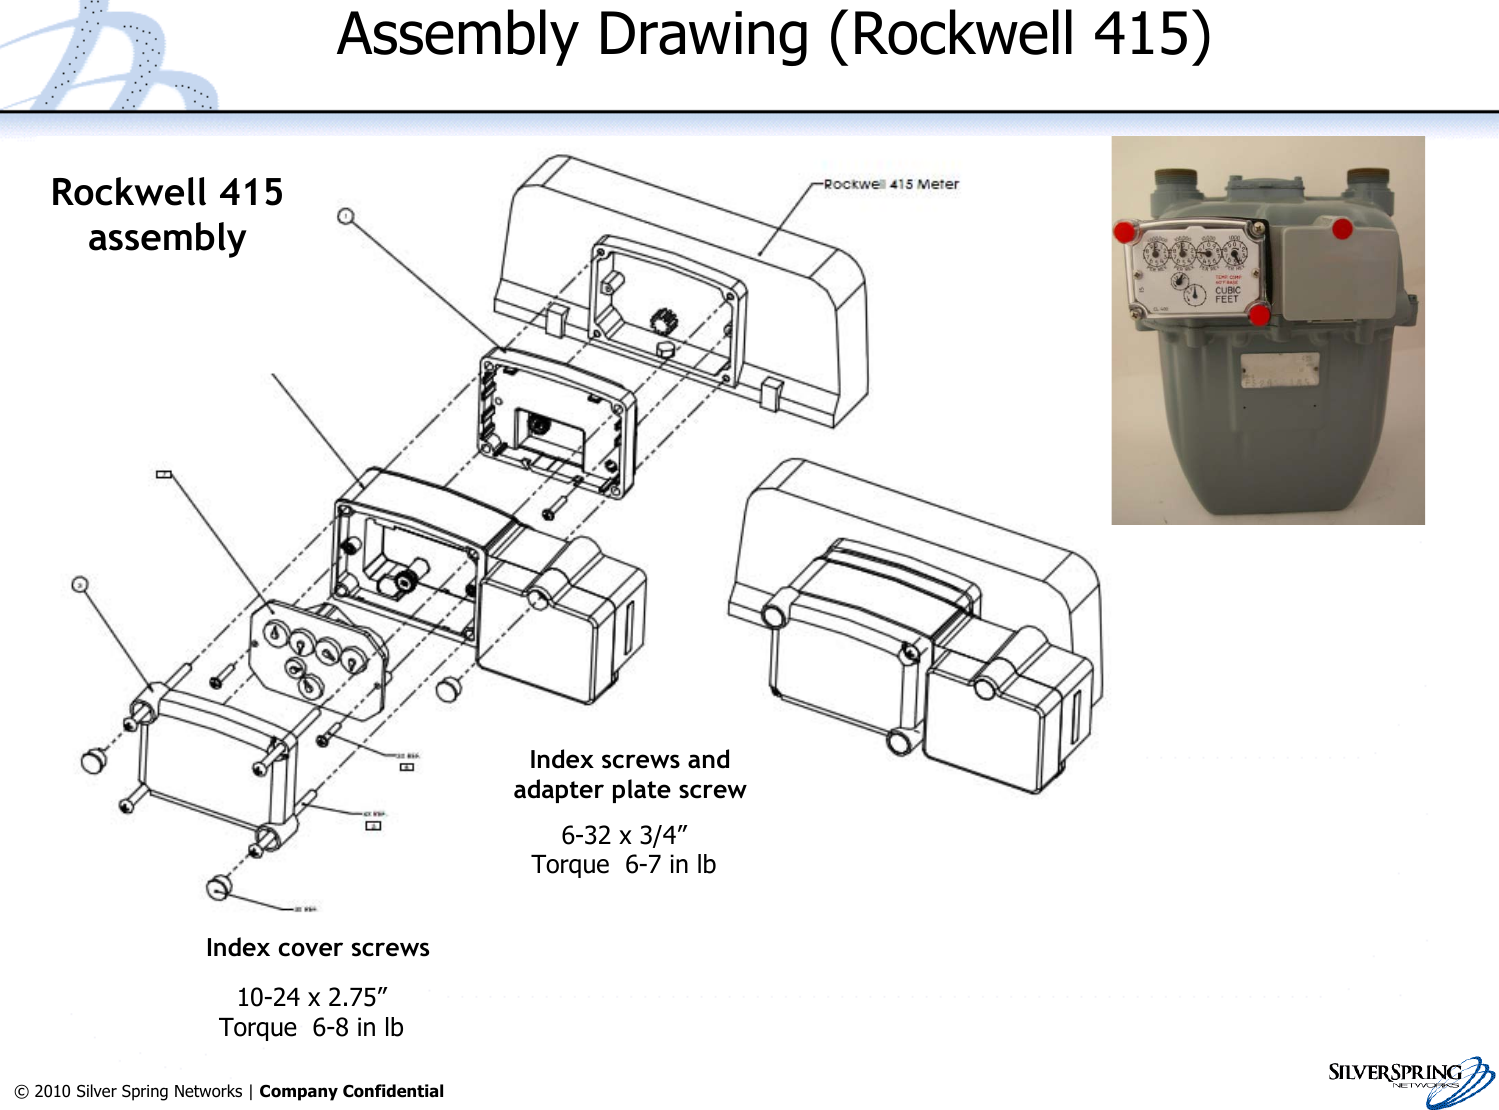 26© 2010 Silver Spring Networks | Company Confidential Assembly Drawing (Rockwell 415)Rockwell 415assemblyIndex cover screwsIndex screws andadapter plate screw6-32 x 3/4”Torque  6-7 in lb10-24 x 2.75”Torque  6-8 in lb